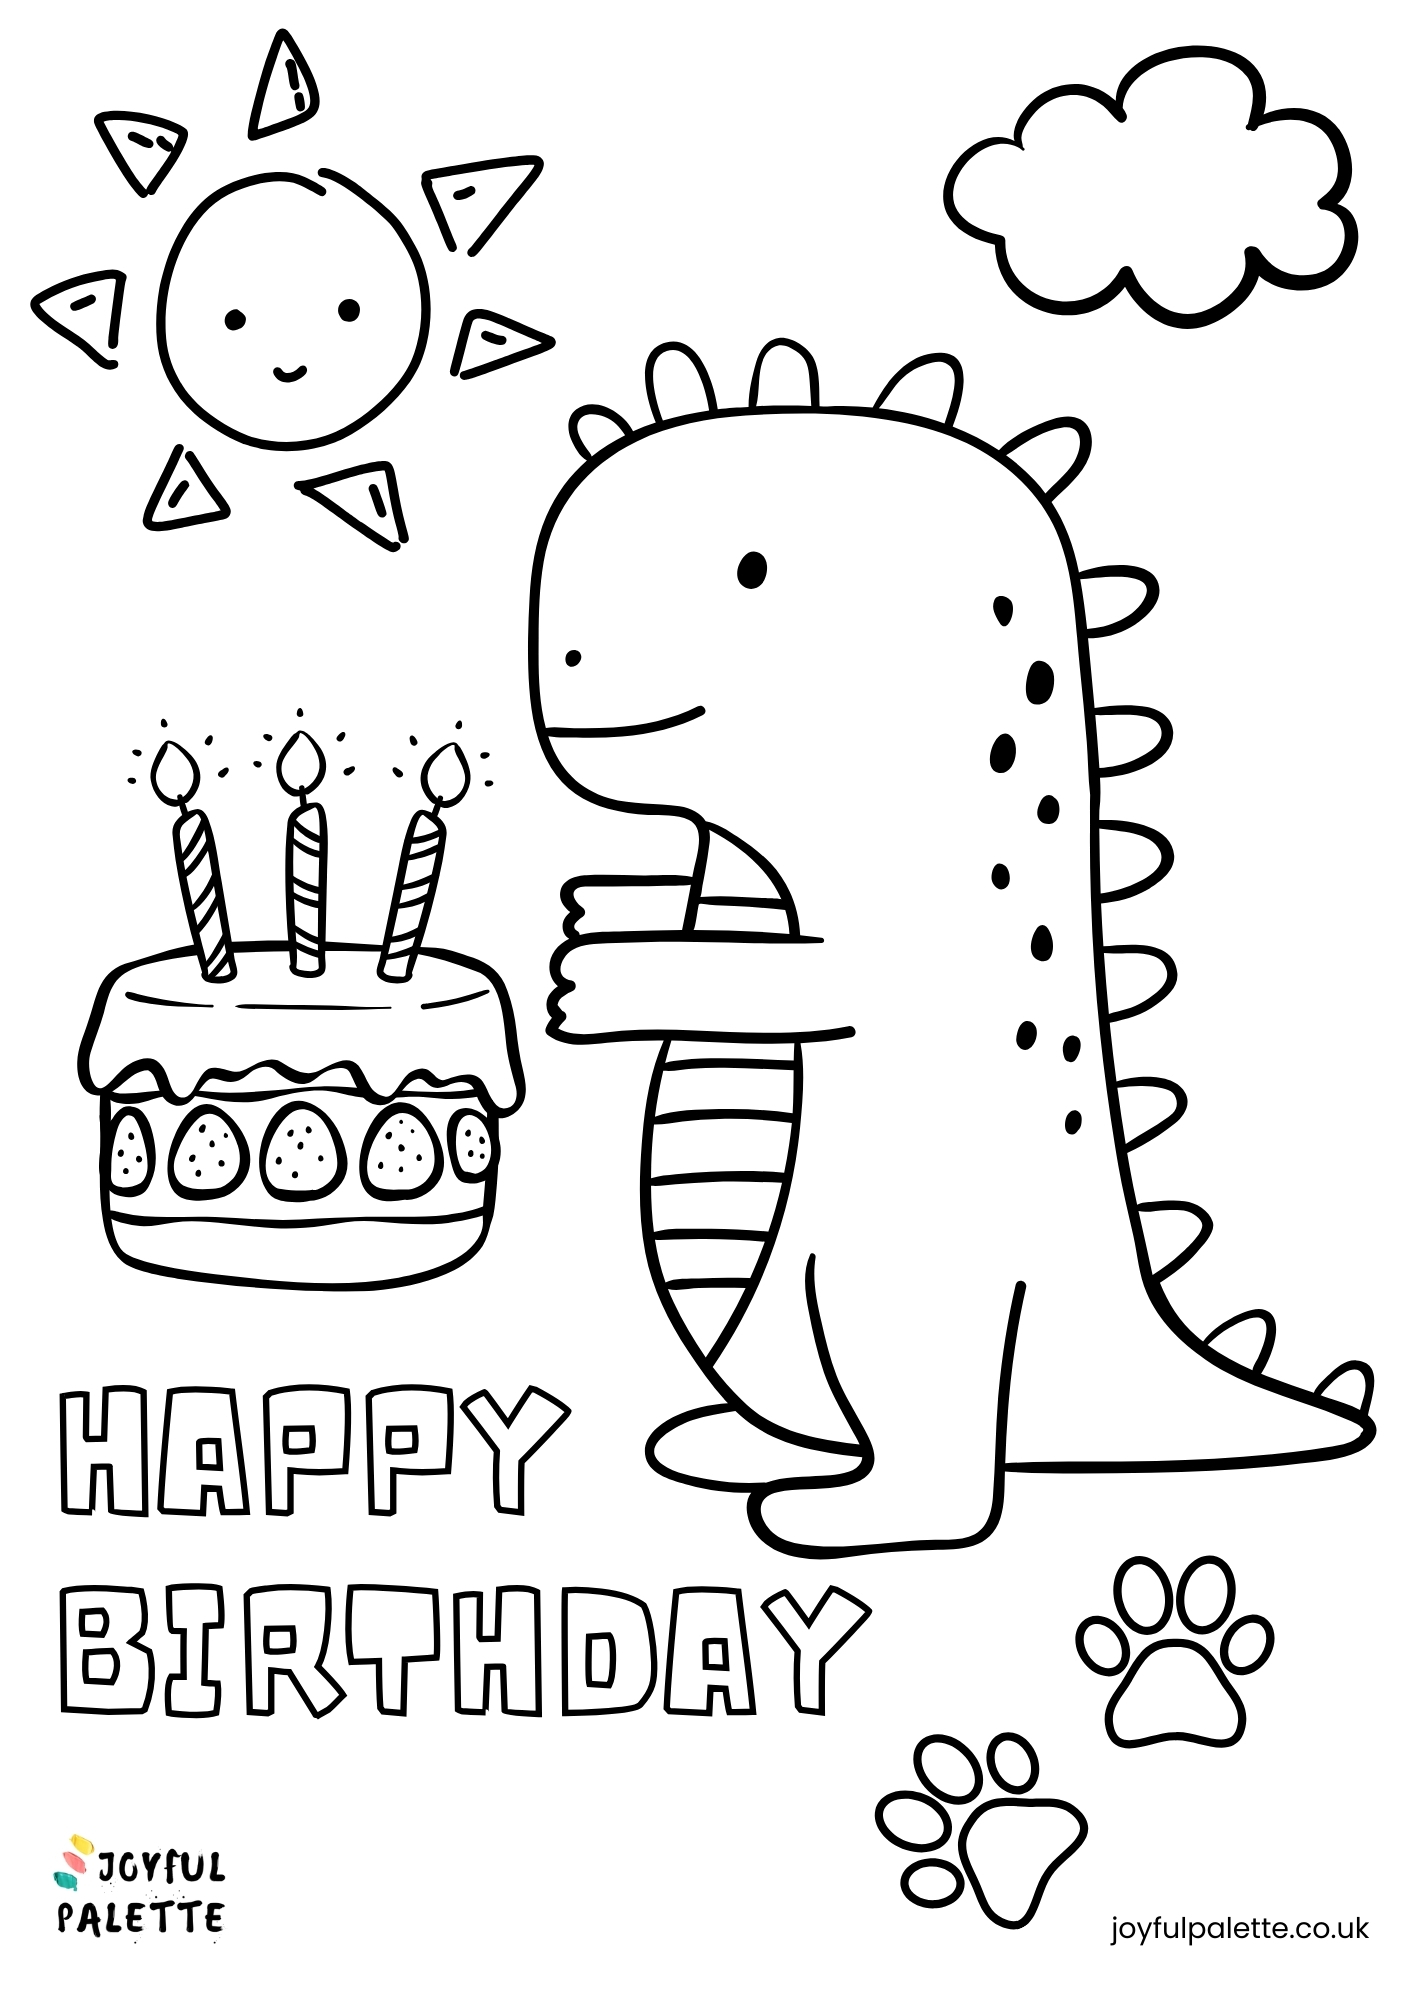 Happy Birthday Coloring Pages - Joyful Palette